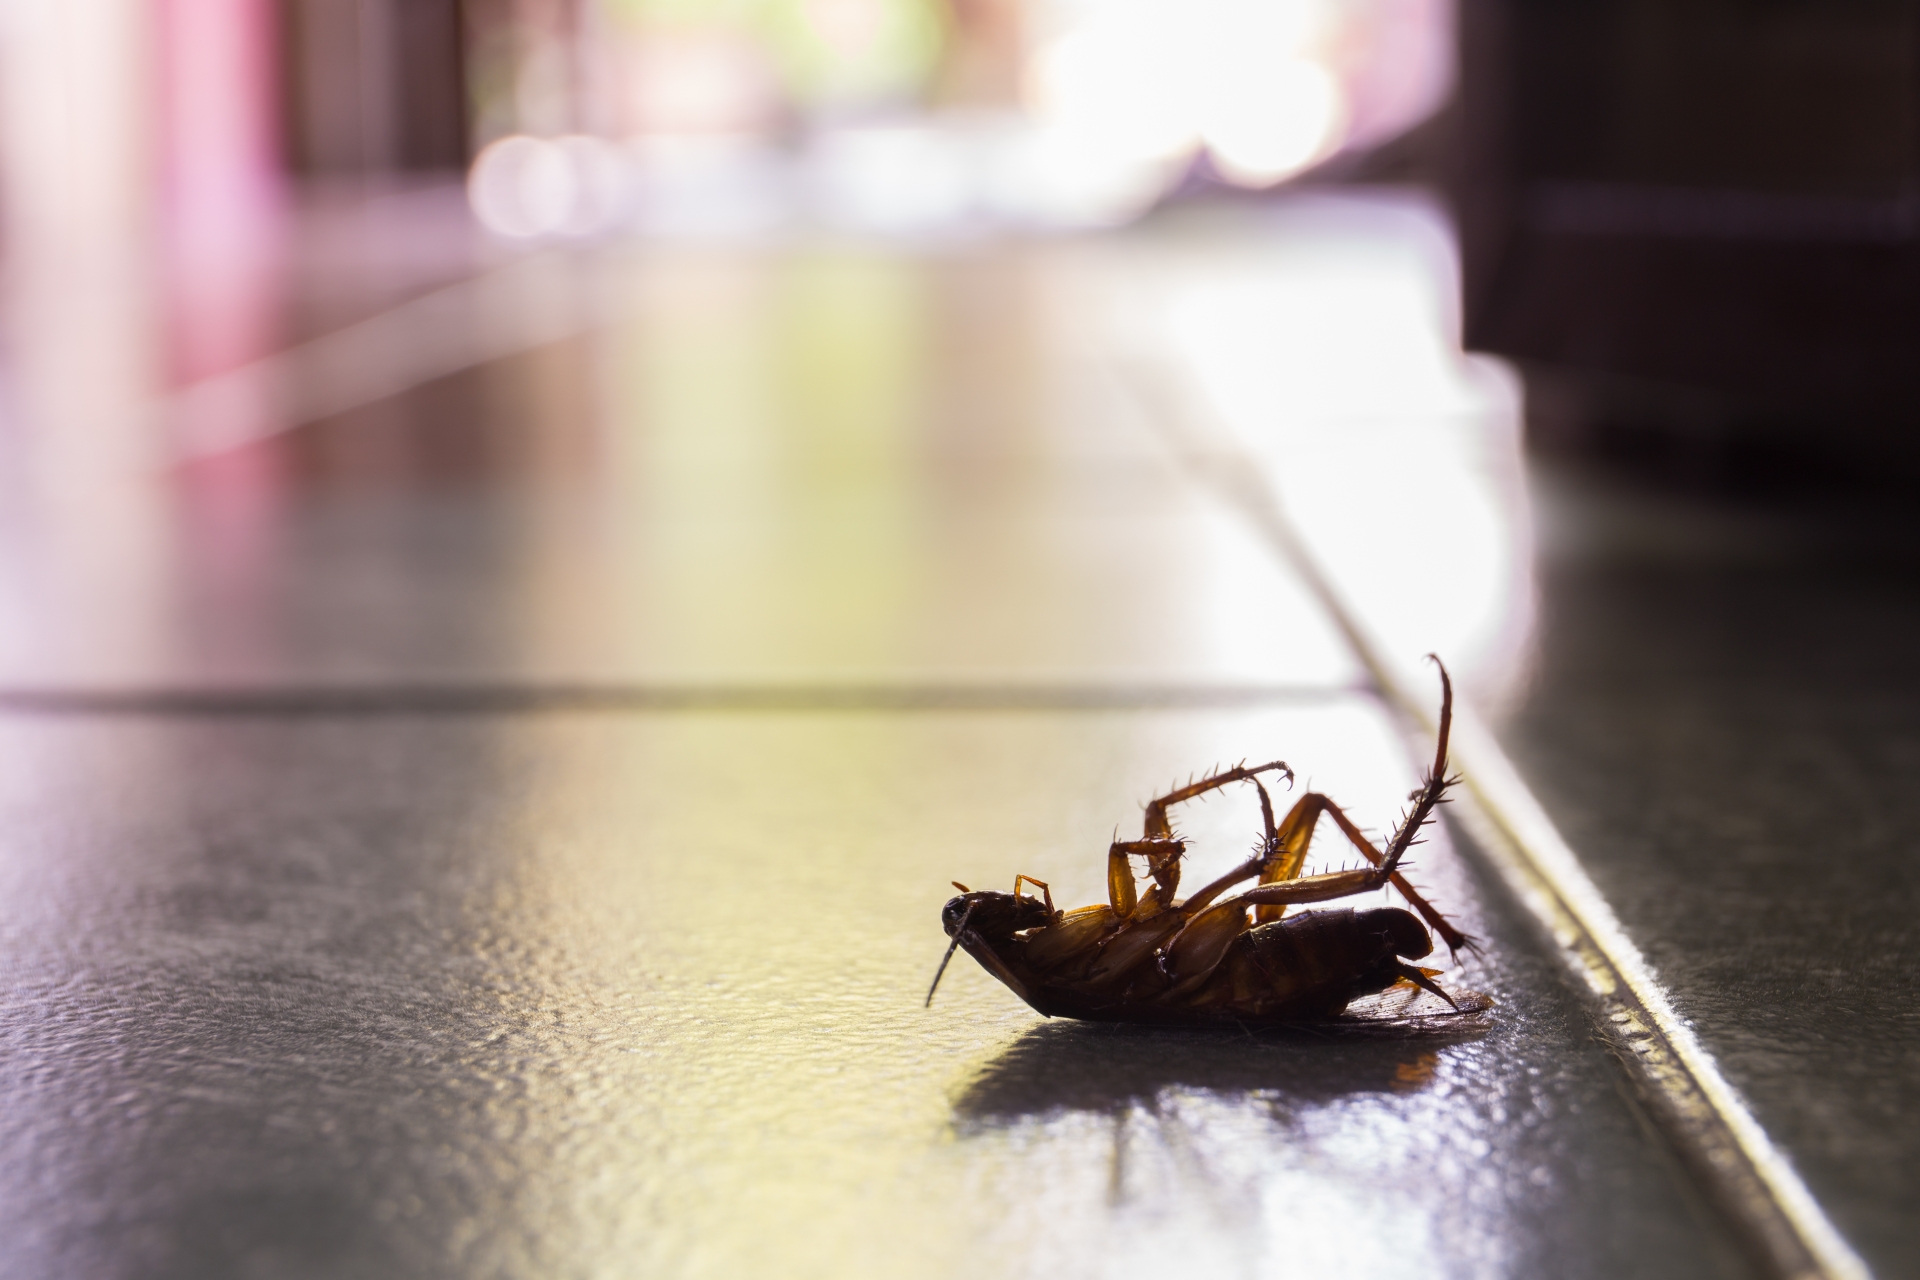 Cockroach Control, Pest Control in Pimlico, SW1. Call Now 020 8166 9746